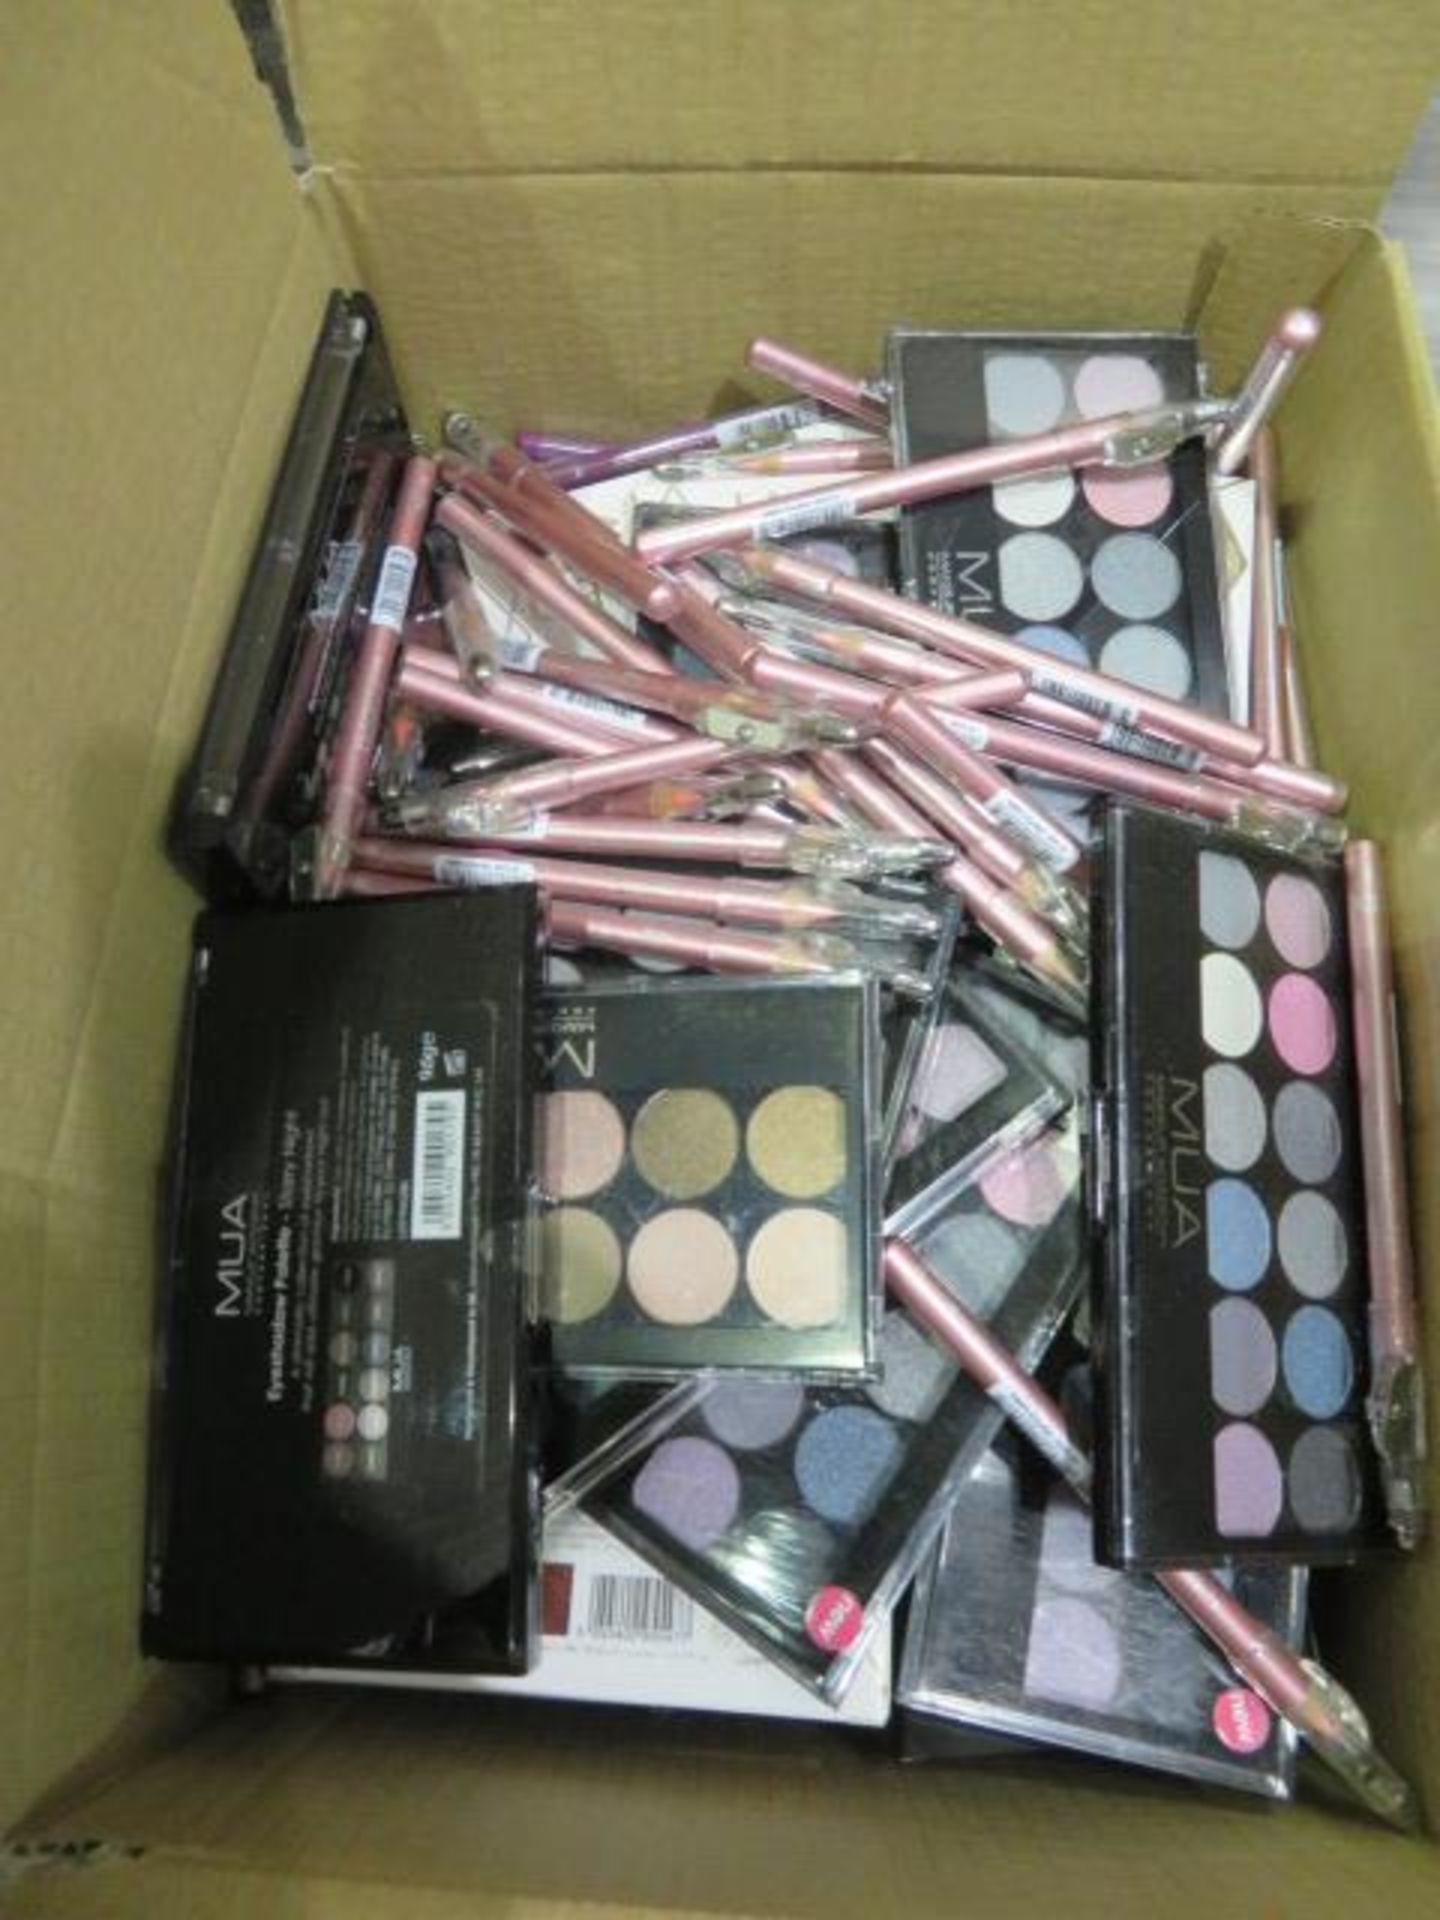 (Z27) Circa. 200 items of various new make up acadamy make up to include: starry night eyeshado... - Image 3 of 3